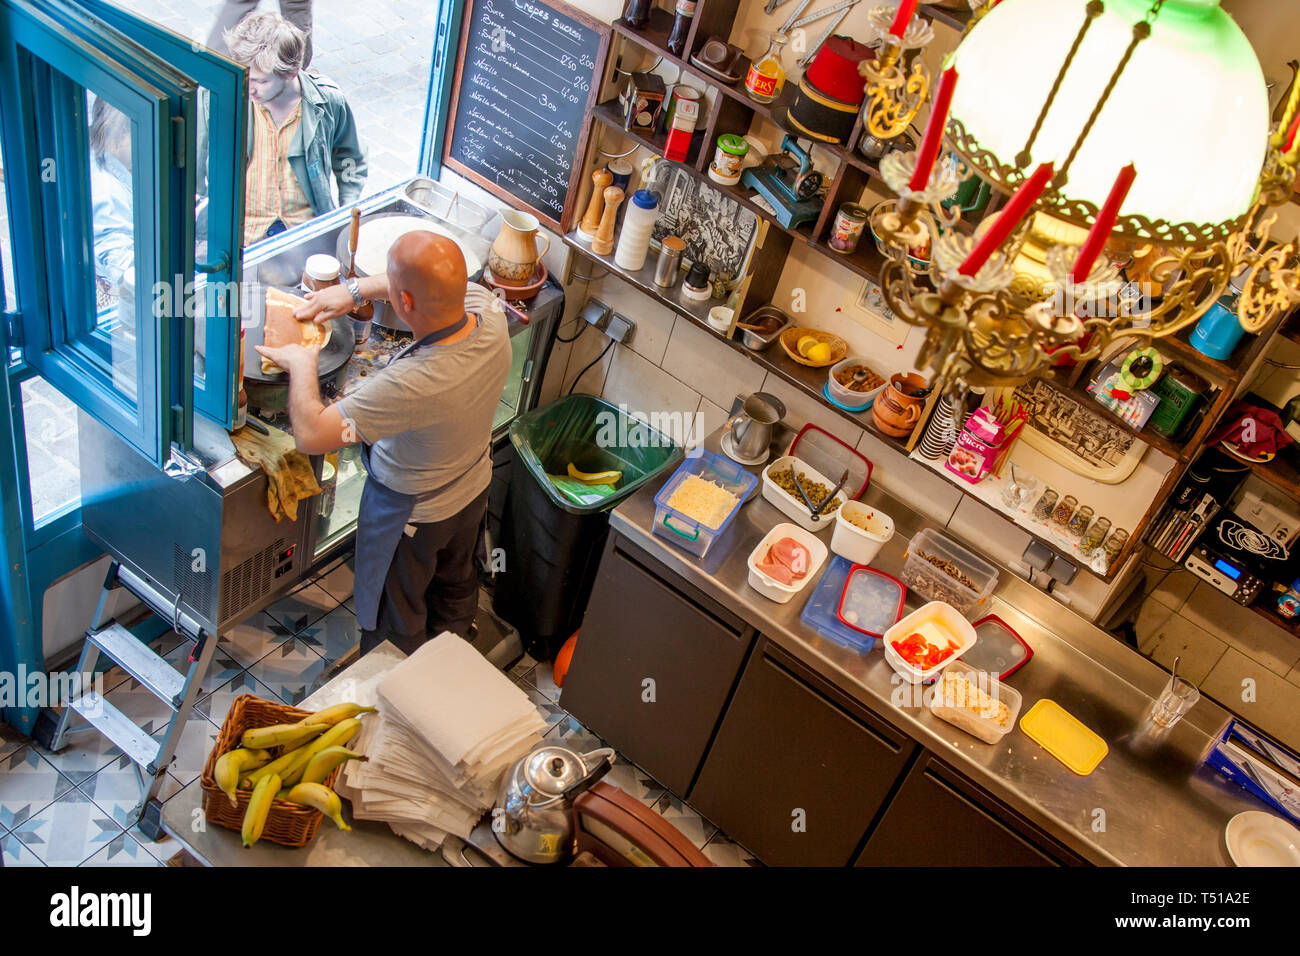 Man making Crepes for tourists in his Creperie, Marais, Paris, France Stock Photo